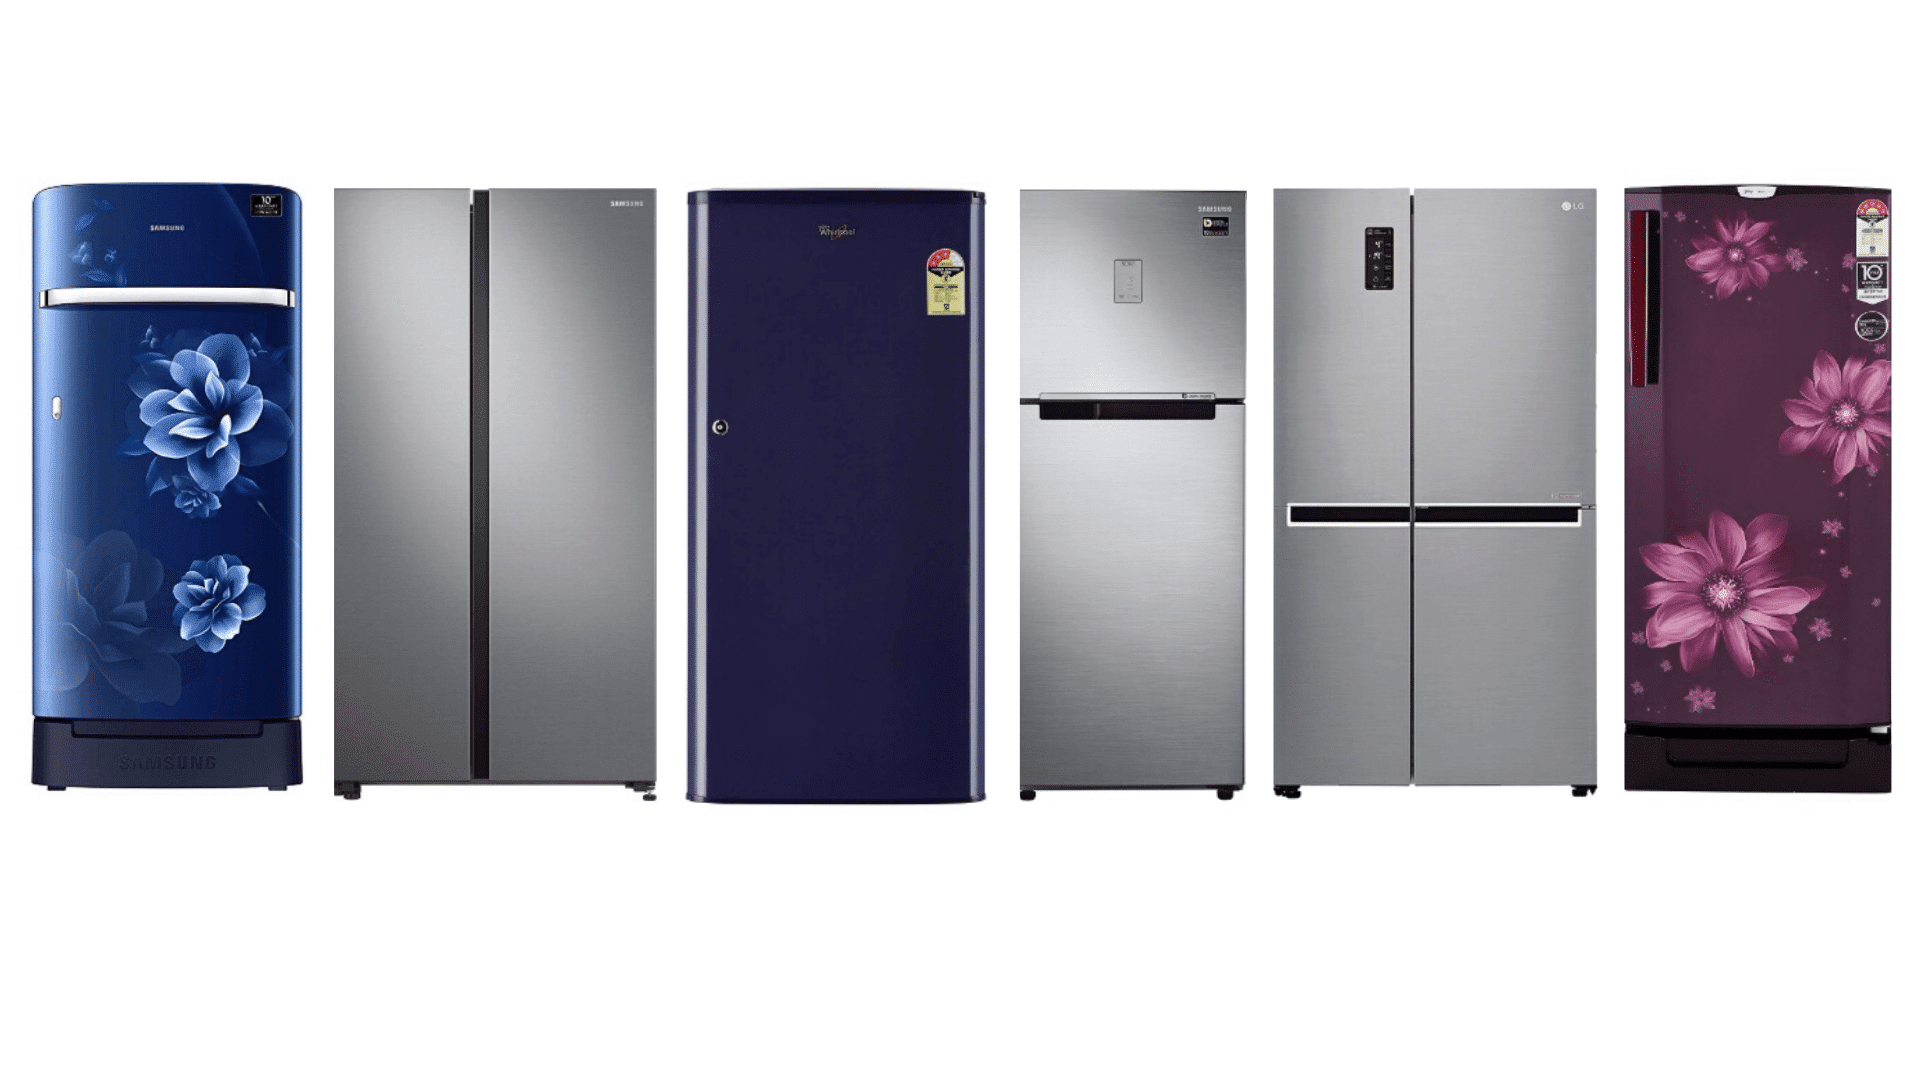 Working Principle Of Refrigerator - How Does It Work?